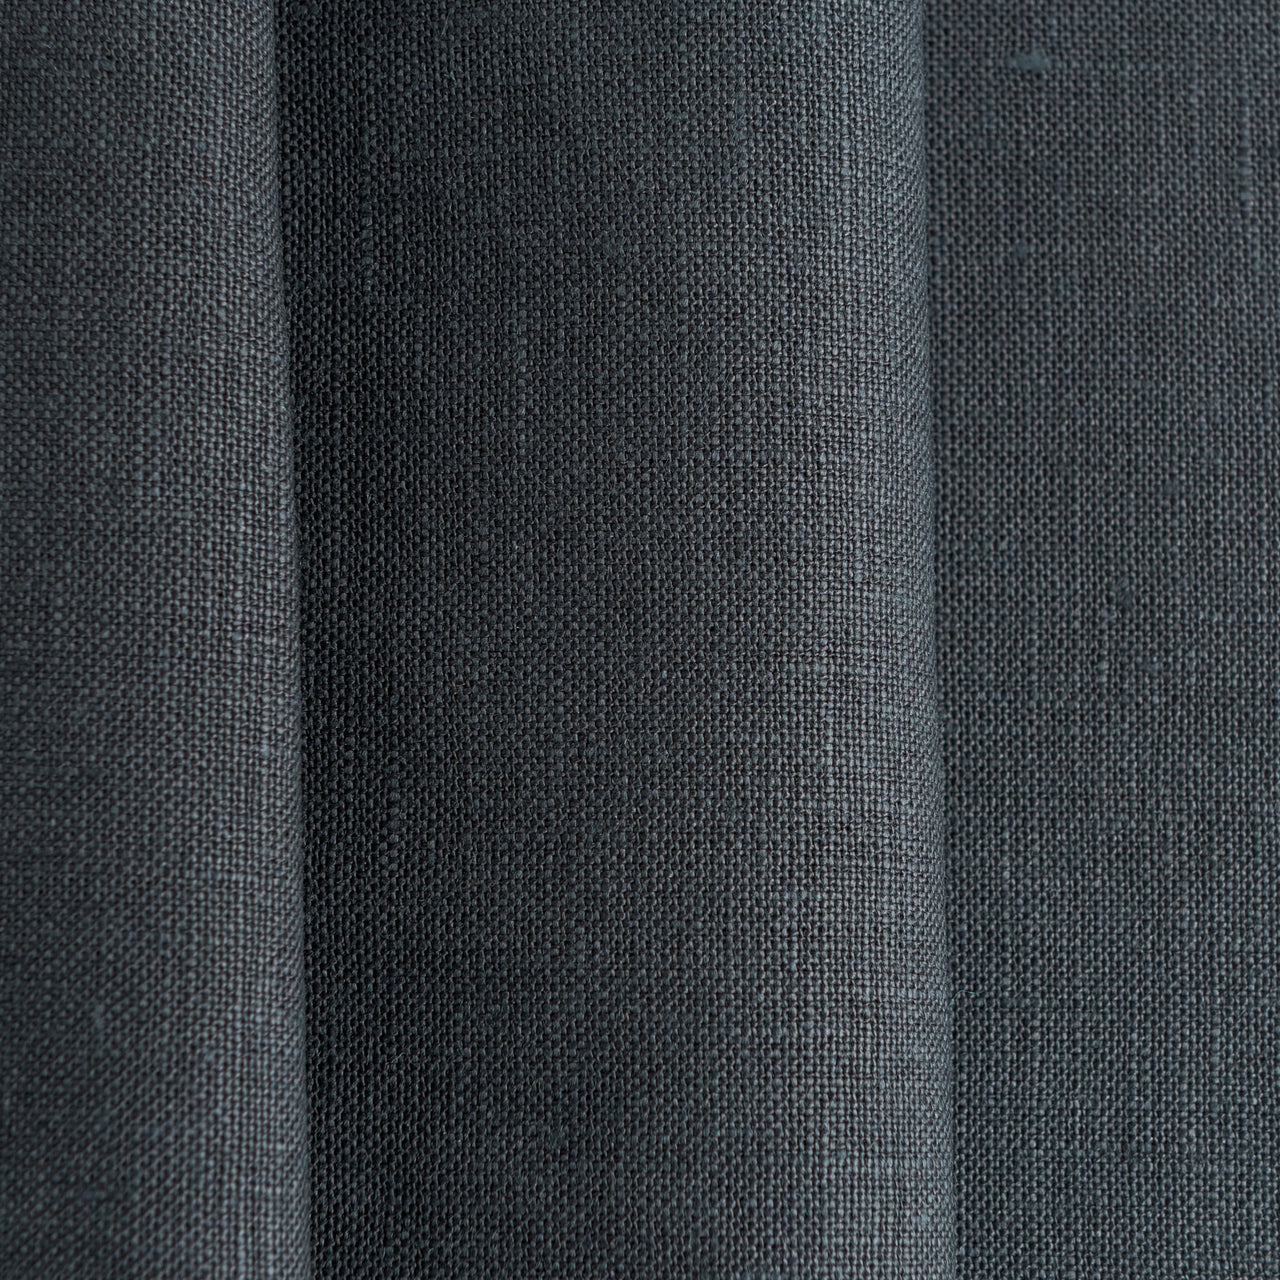 Charcoal Grey Linen Curtain with White Cotton or Blackout Lining - Back Tabs Heading - Custom Sizes & Colors